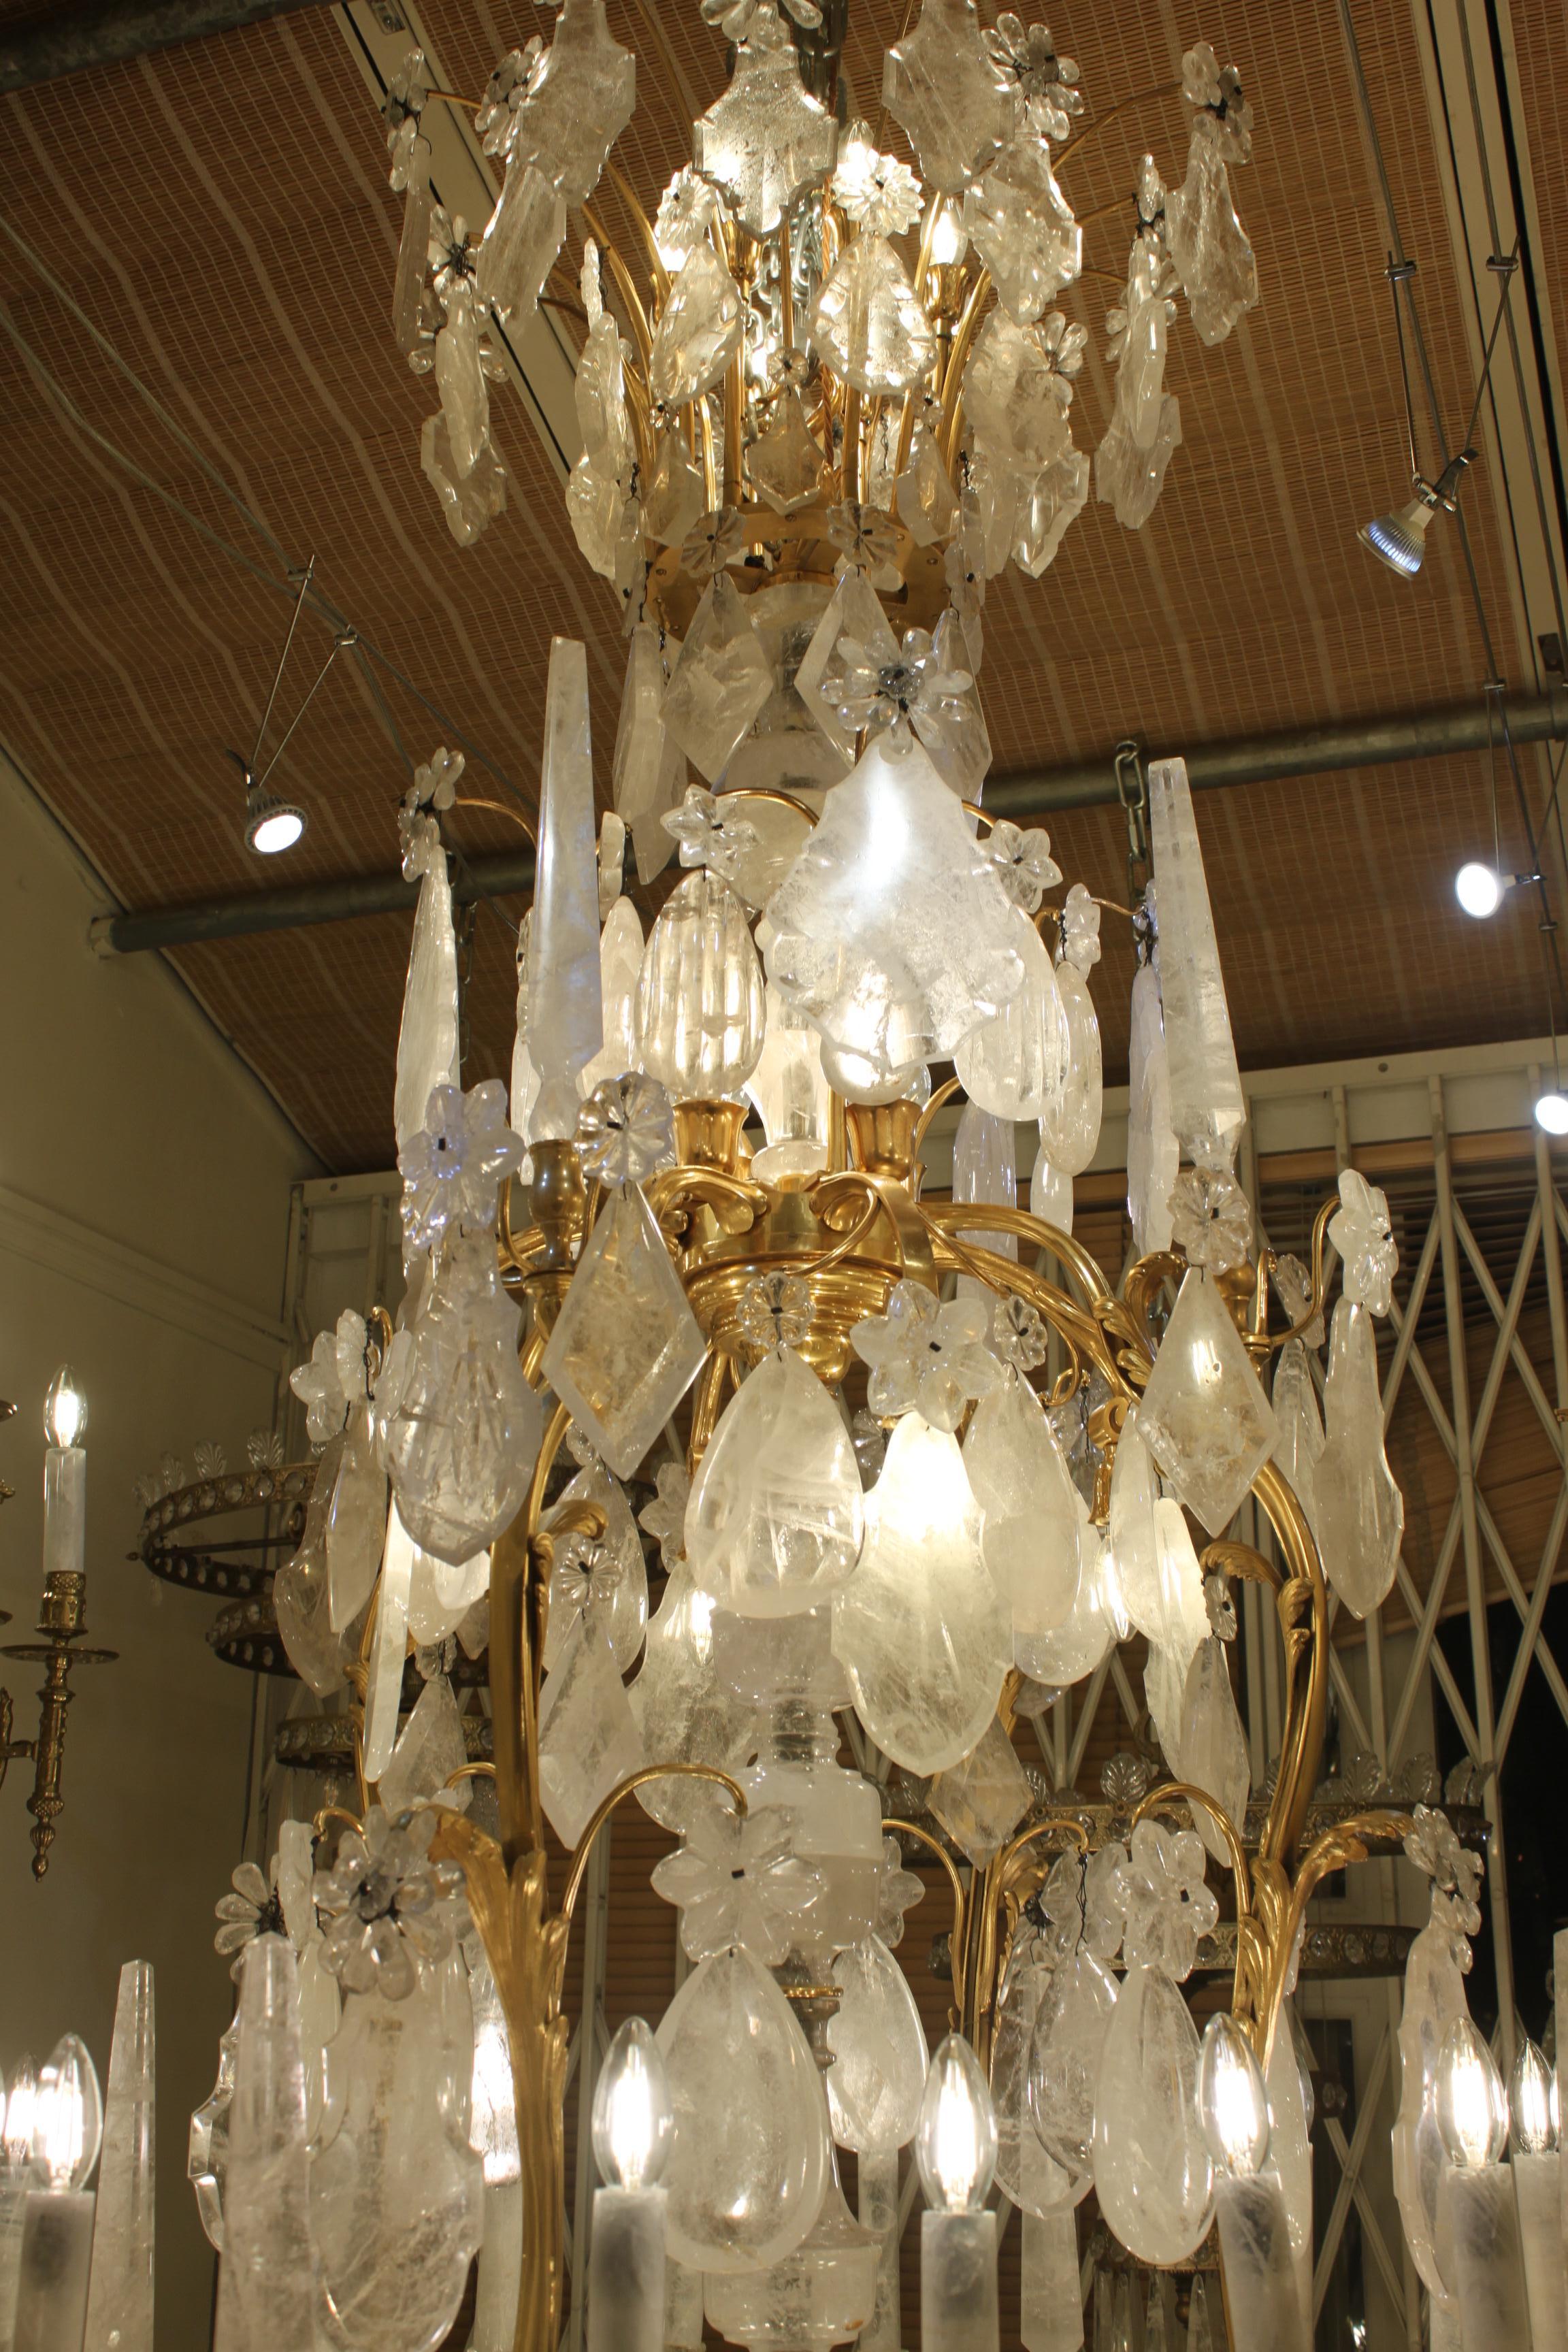 Unique Importan George Hoentschel French Rock Crystal &Gilt Bronze Chandelier In Excellent Condition For Sale In London, GB